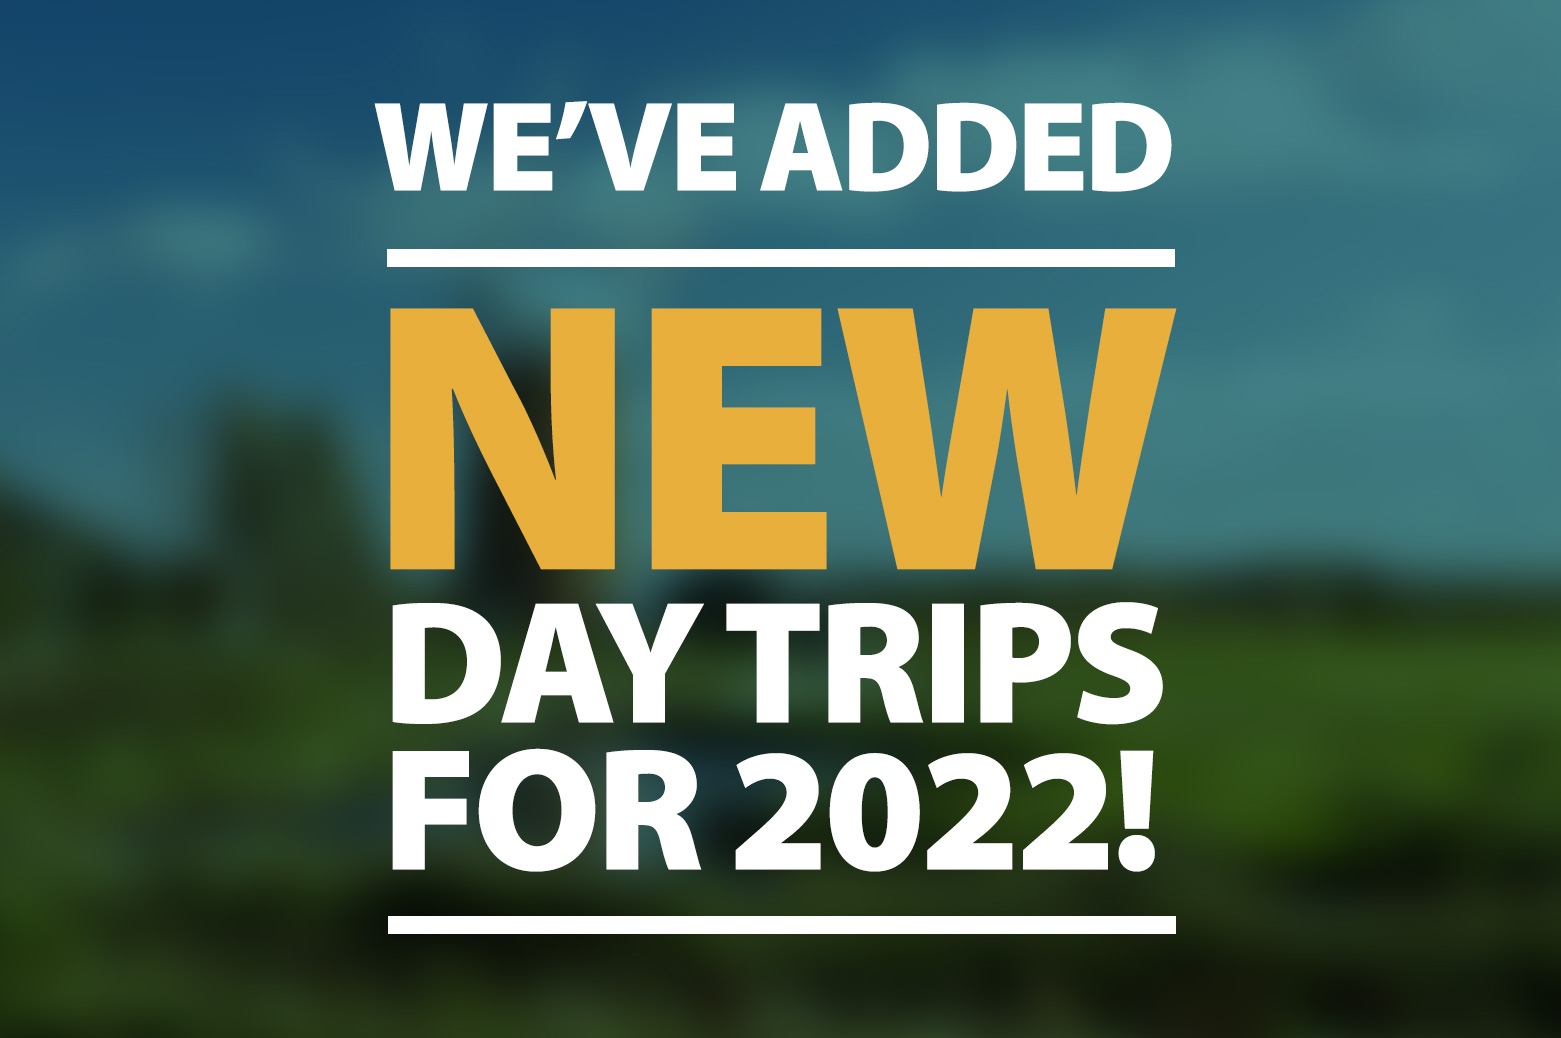 Maxfields Travel South Yorkshire UK Day Trips and Holidays Coach Trips Tours Holidays 2022